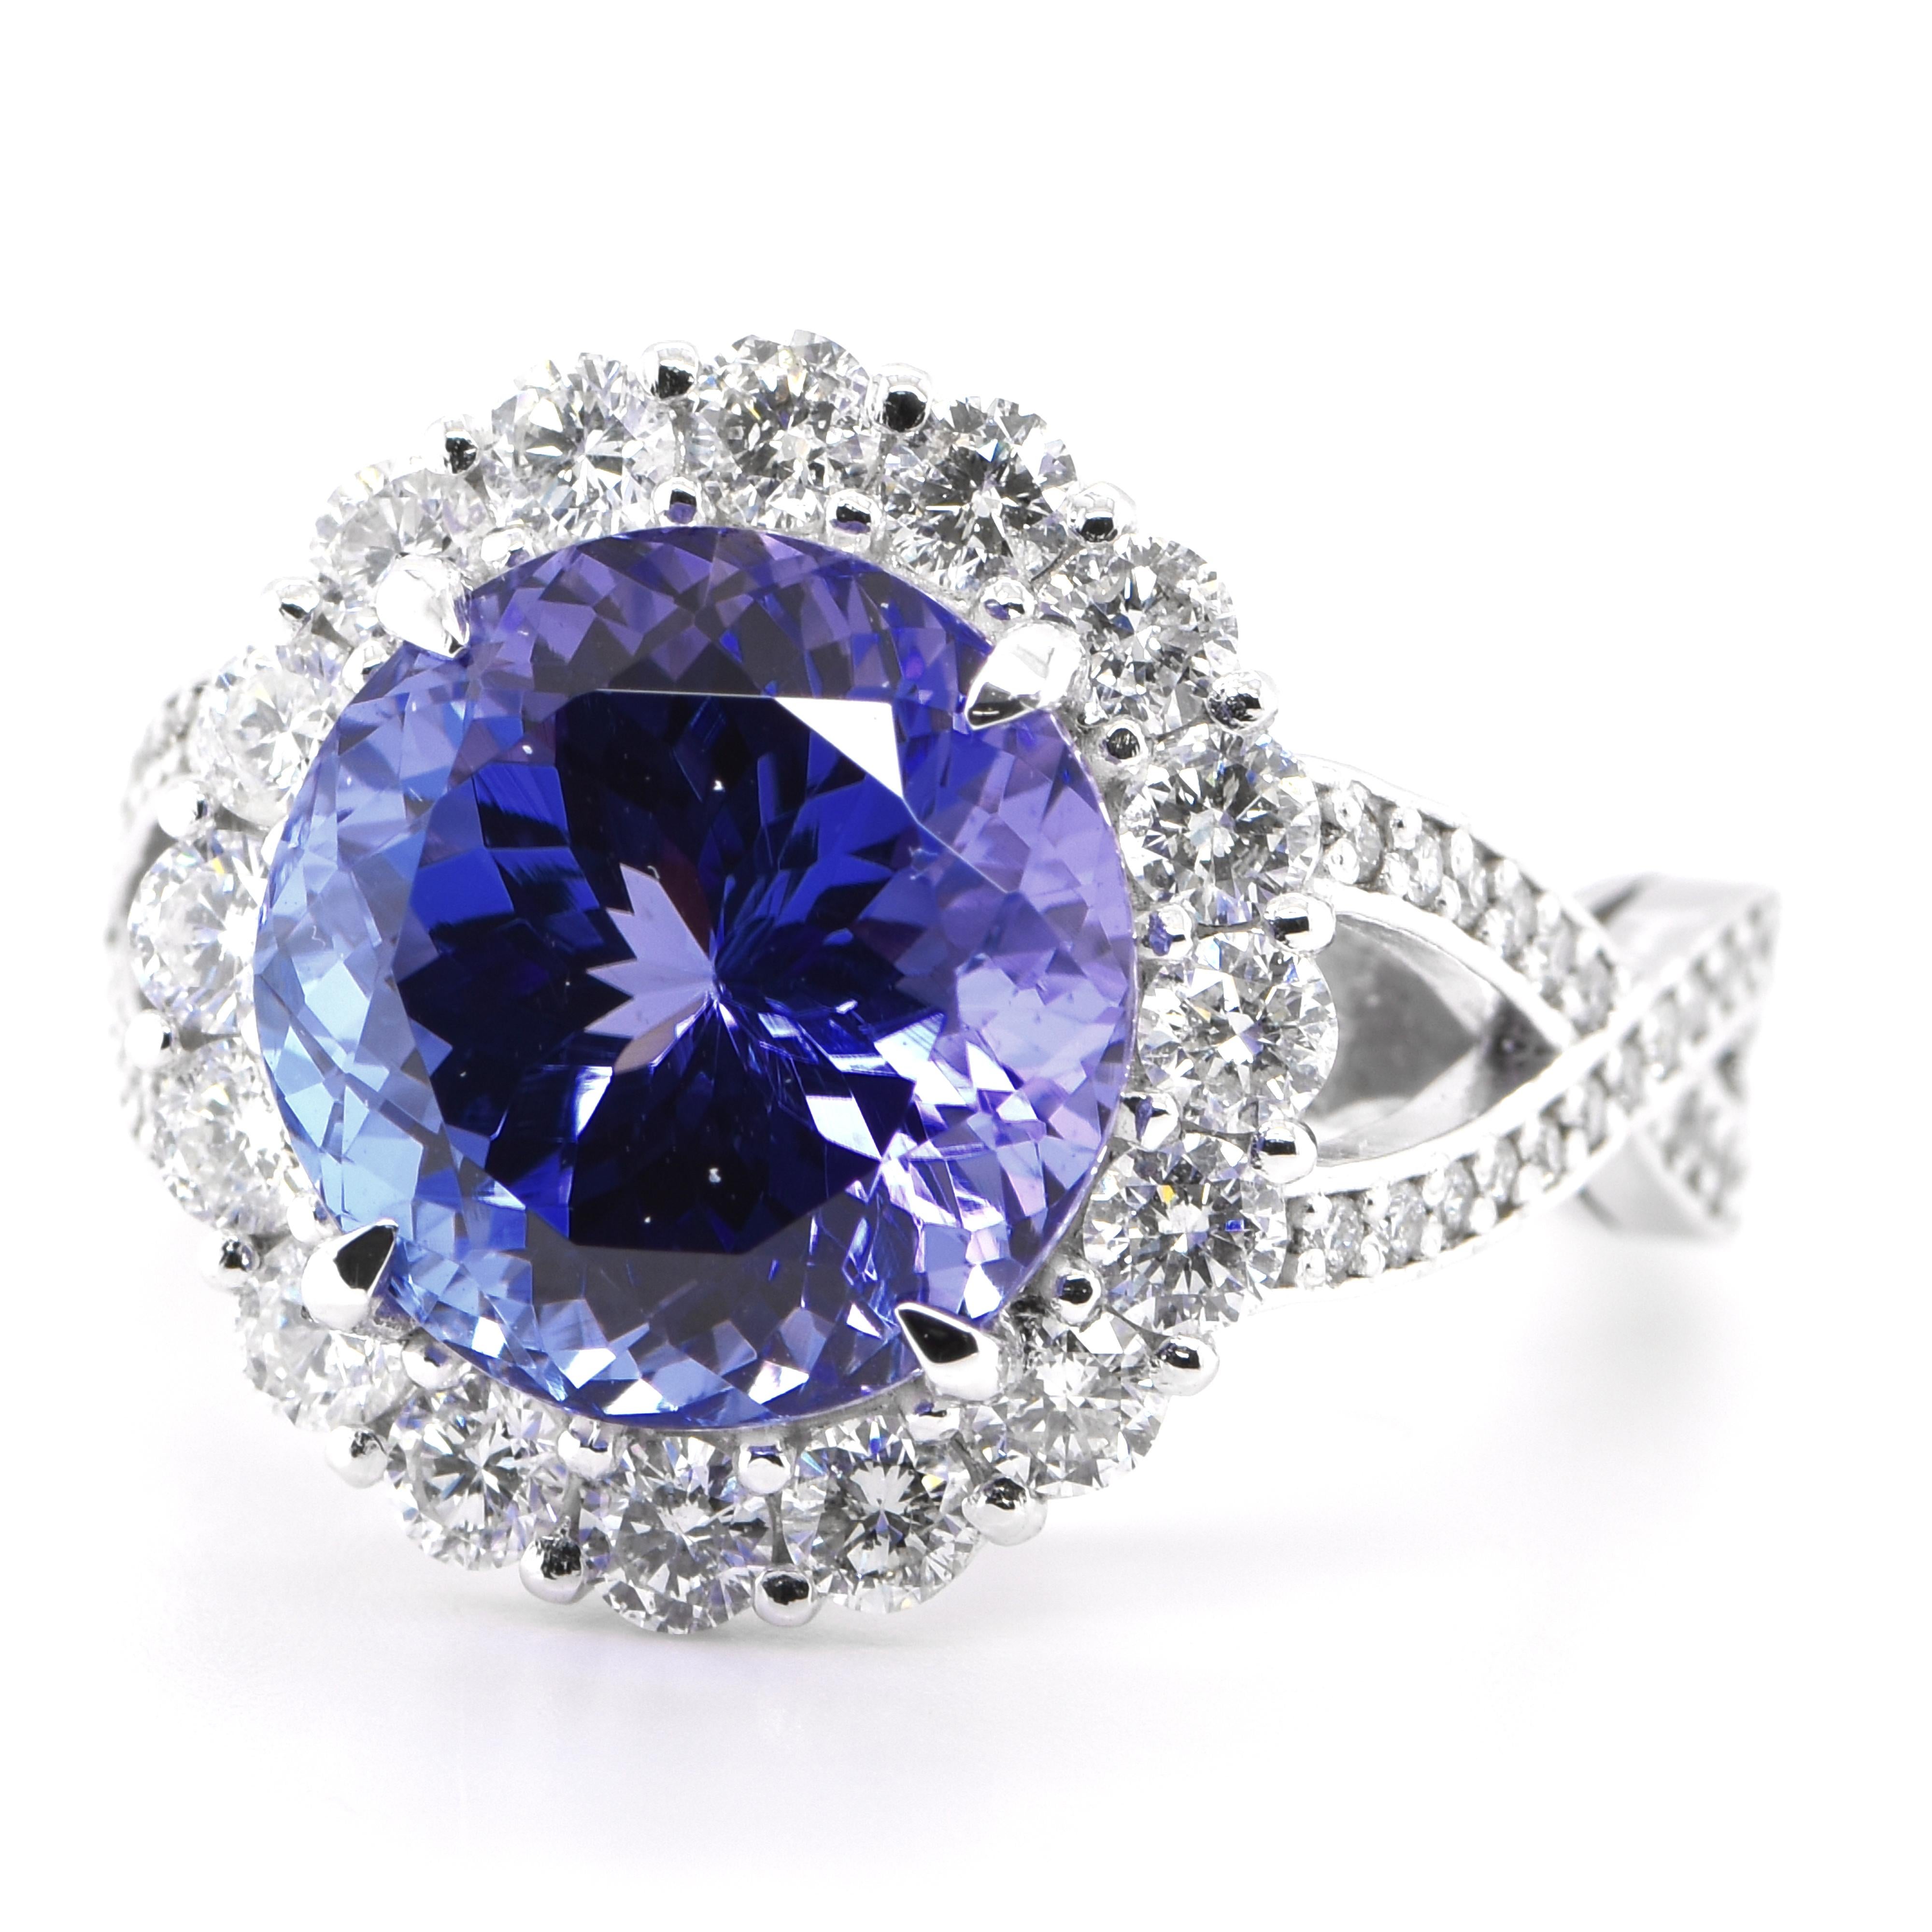 A beautiful Cocktail Ring featuring a 7.41 Carat Natural Tanzanite and 1.24 Carats of Diamond Accents set in Platinum. Tanzanite's name was given by Tiffany and Co after its only known source: Tanzania. Tanzanite displays beautiful pleochroic colors